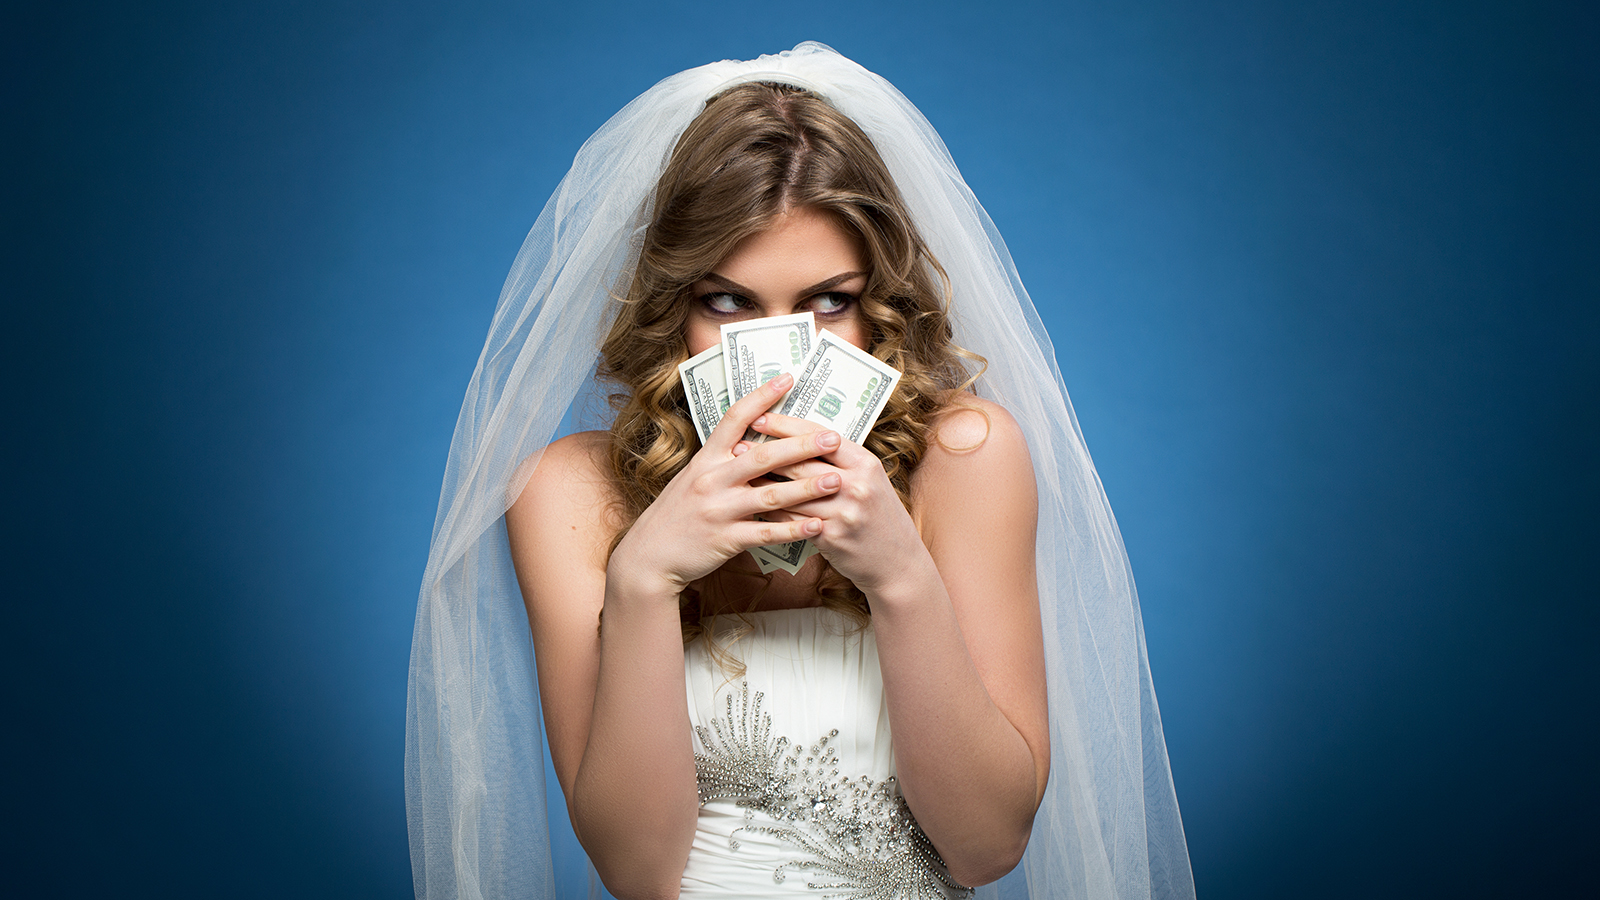 young beautiful girl in wedding dress veil with dollars in hands on blue background